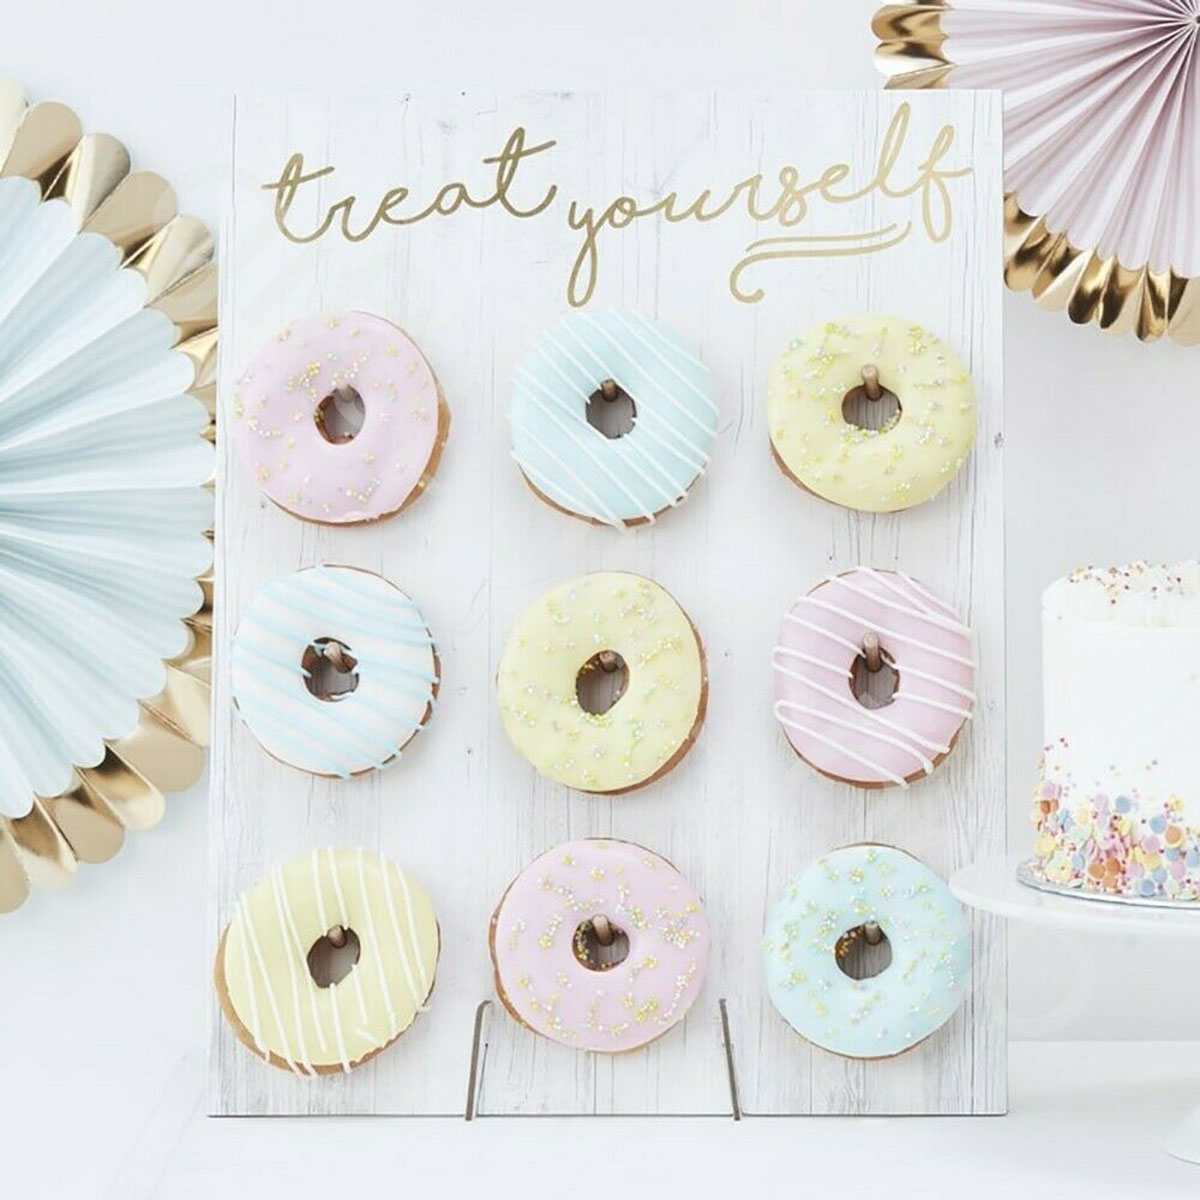 Donut-Wall-Hold-Candy-Sweet-Stand-Wooden-Table-Holder-Wedding-Decor-Supplies-DIY-Decorations-Holder-1622618-2